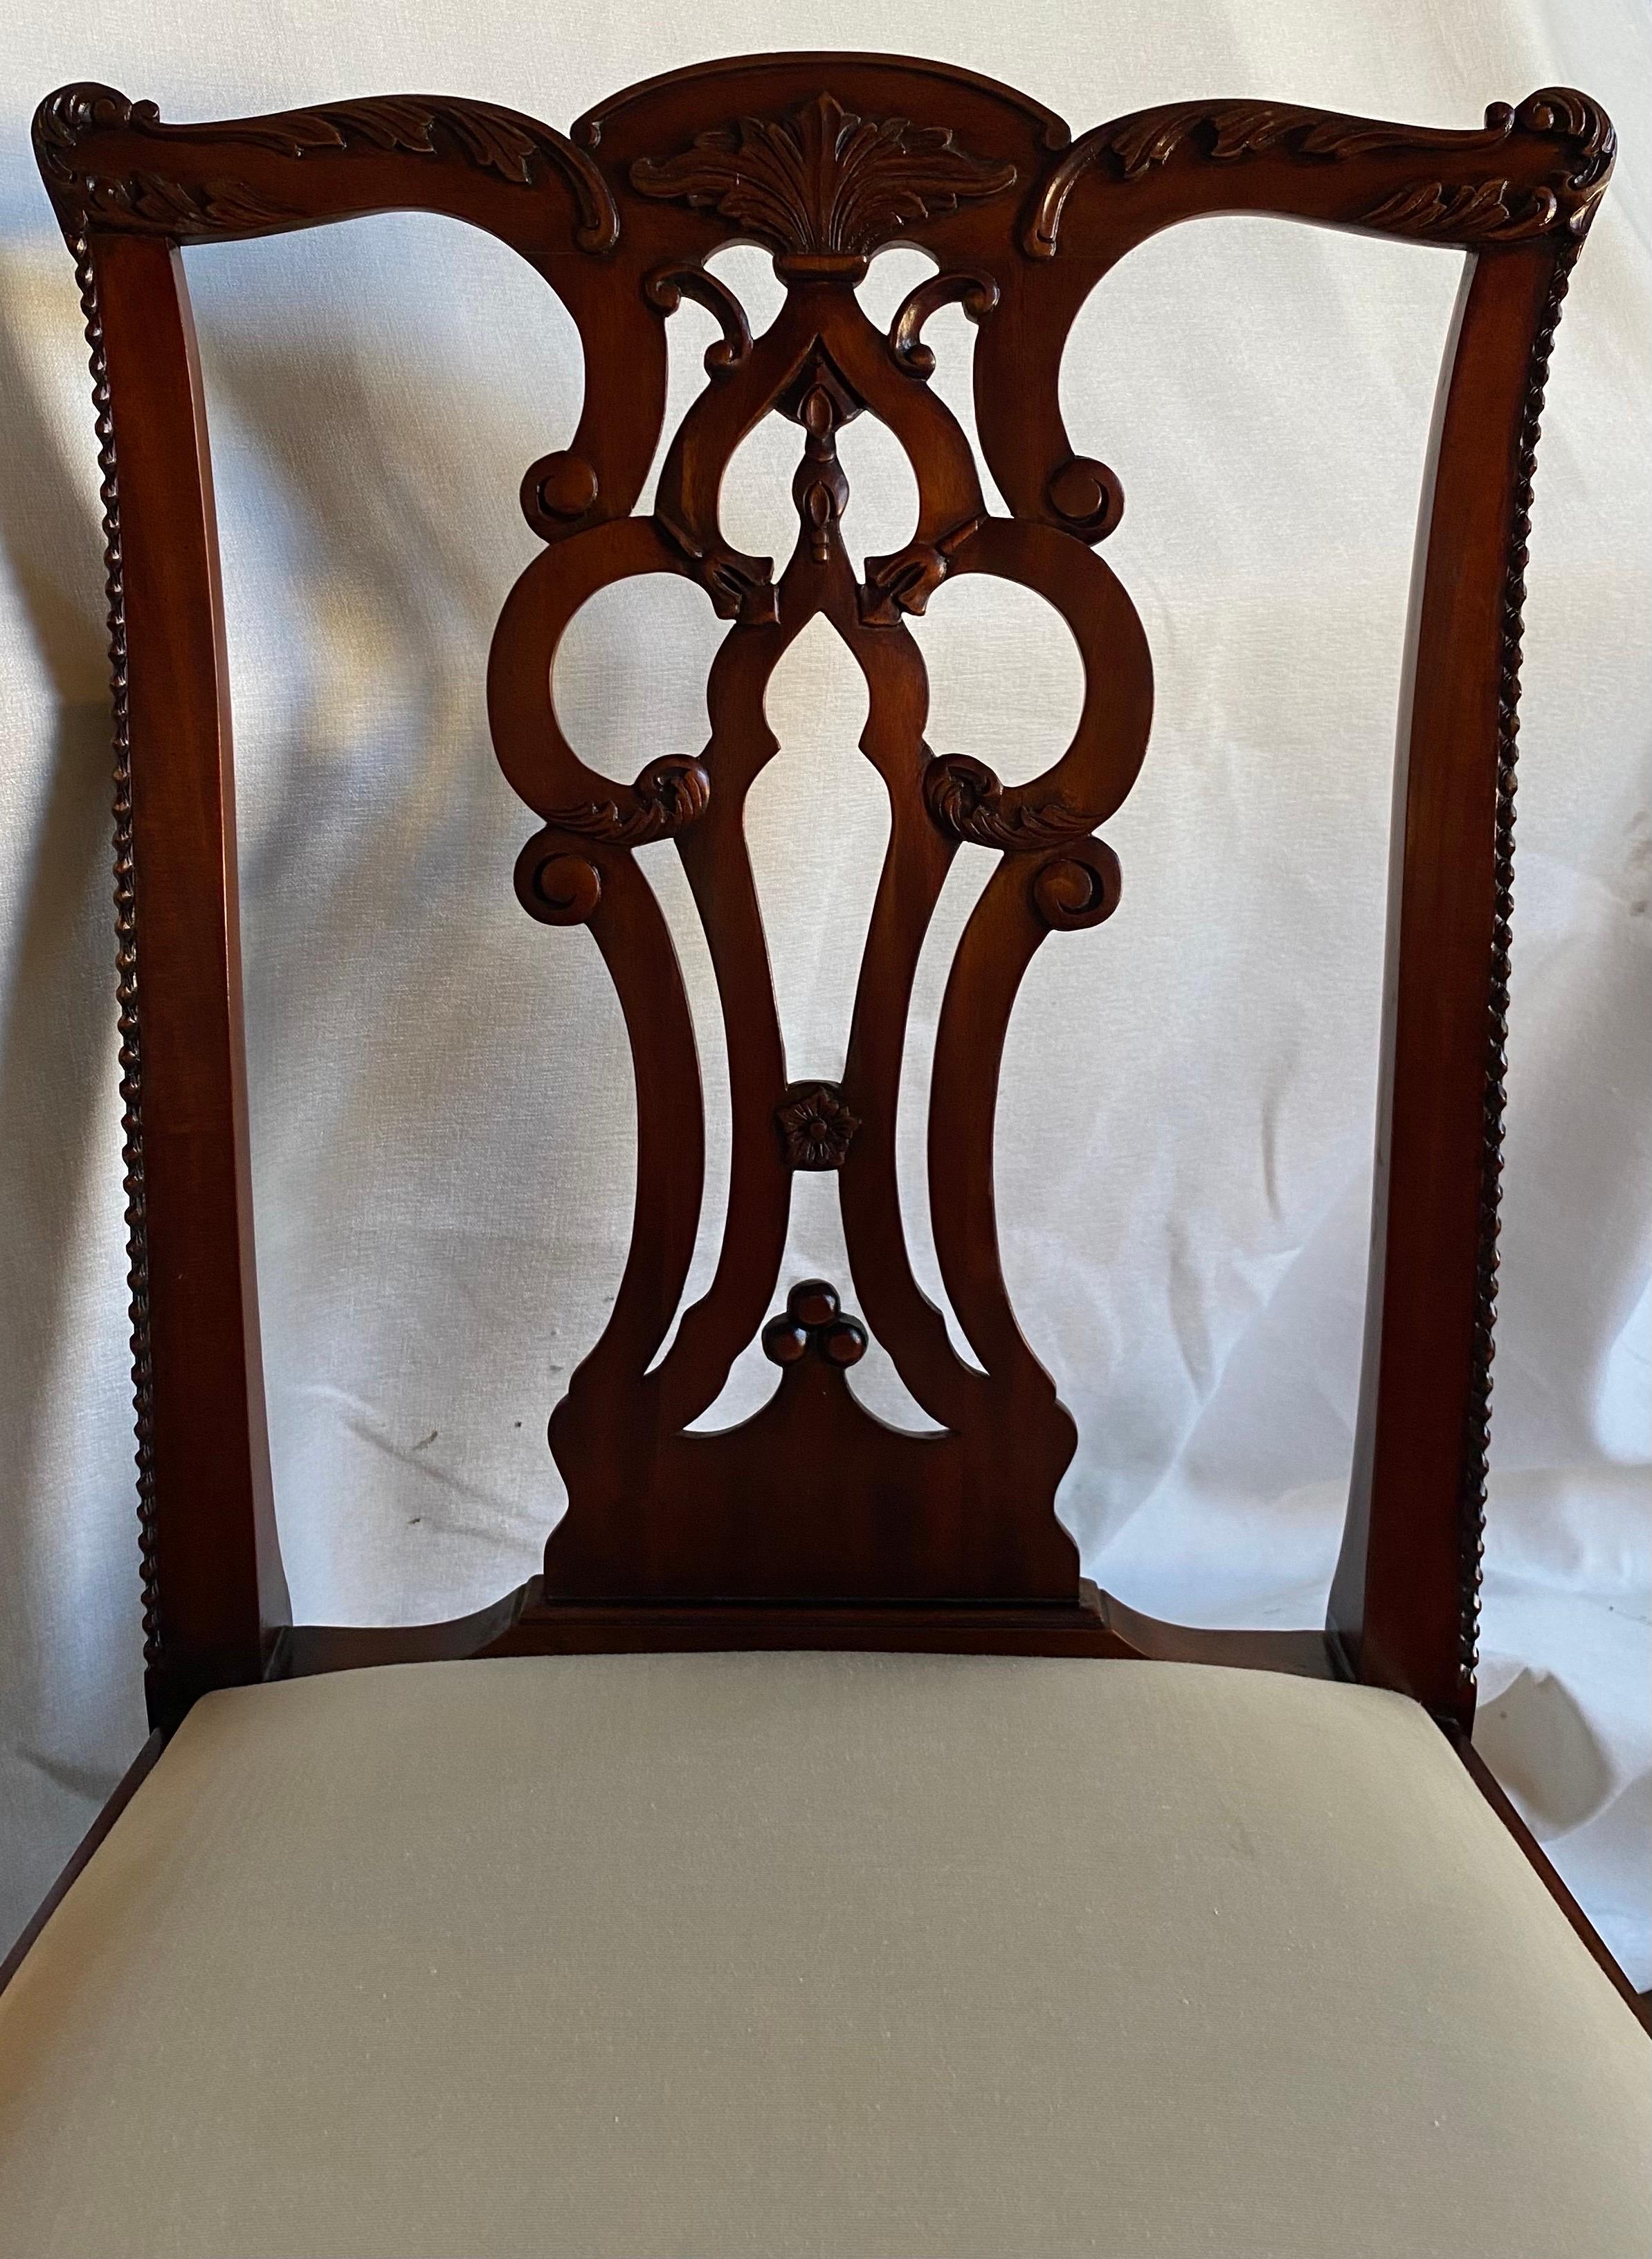 Contemporary Maitland Smith Chippendale Regency Carved Mahogany Dining Side Chairs For Sale